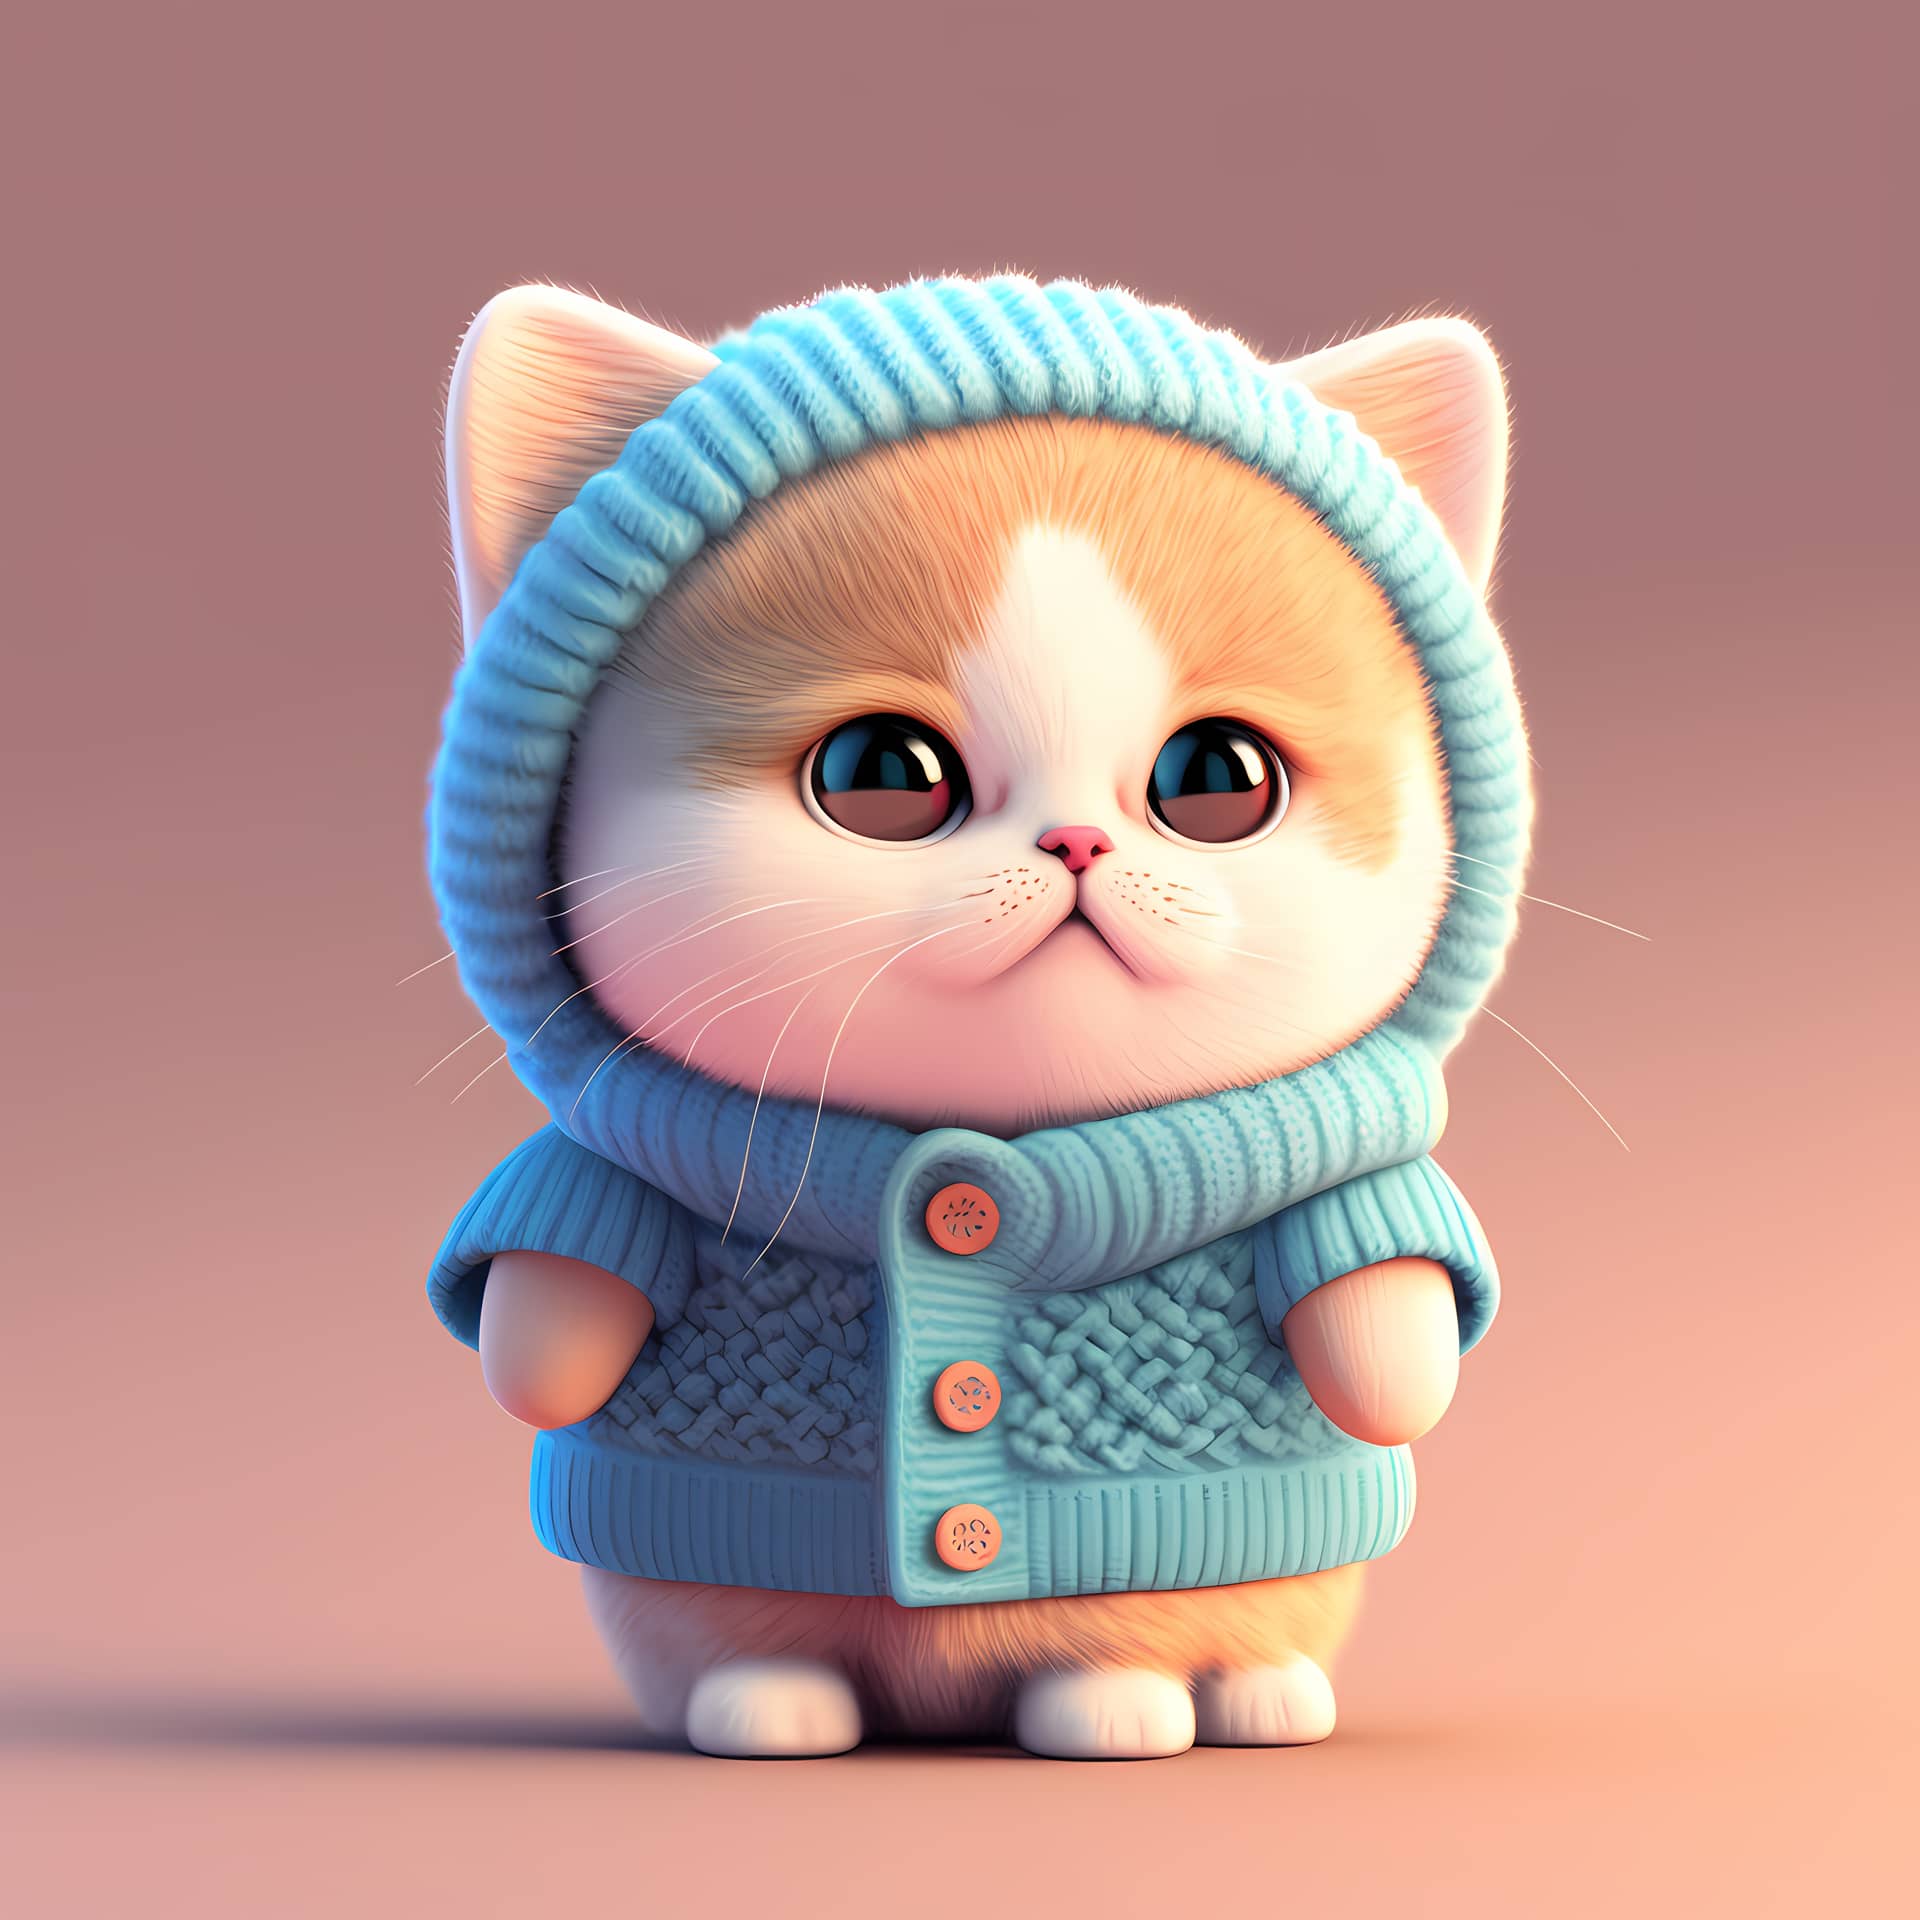 Adorable 3d cat characters wear cute funny colorful clothes picture